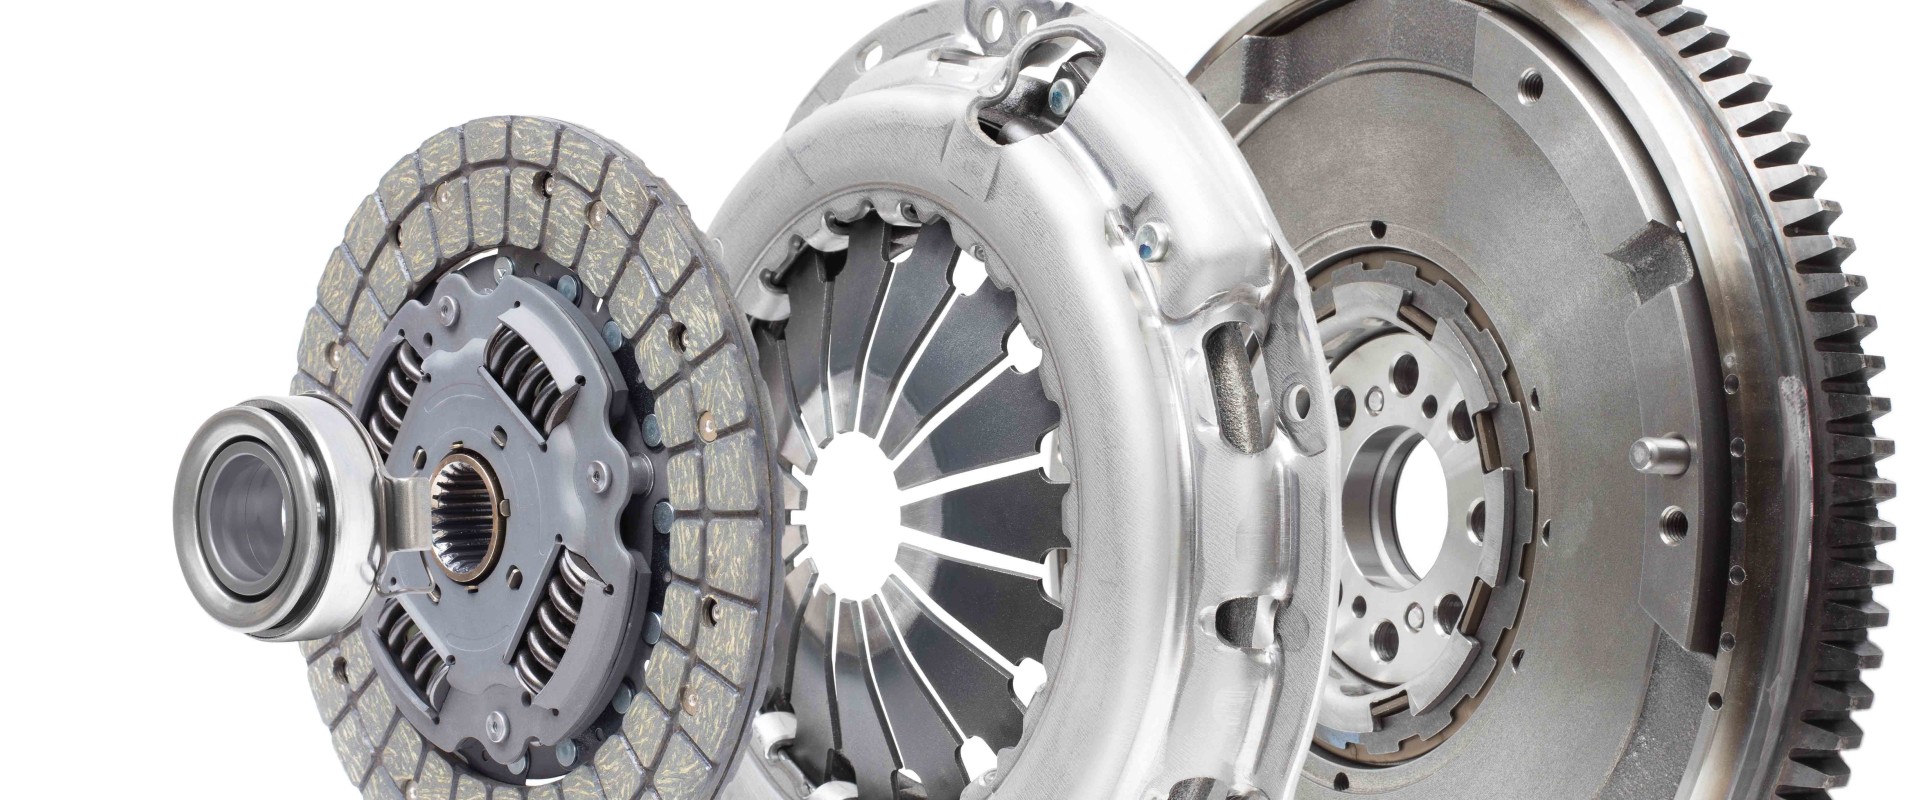 Everything You Need to Know About Clutches and Flywheels